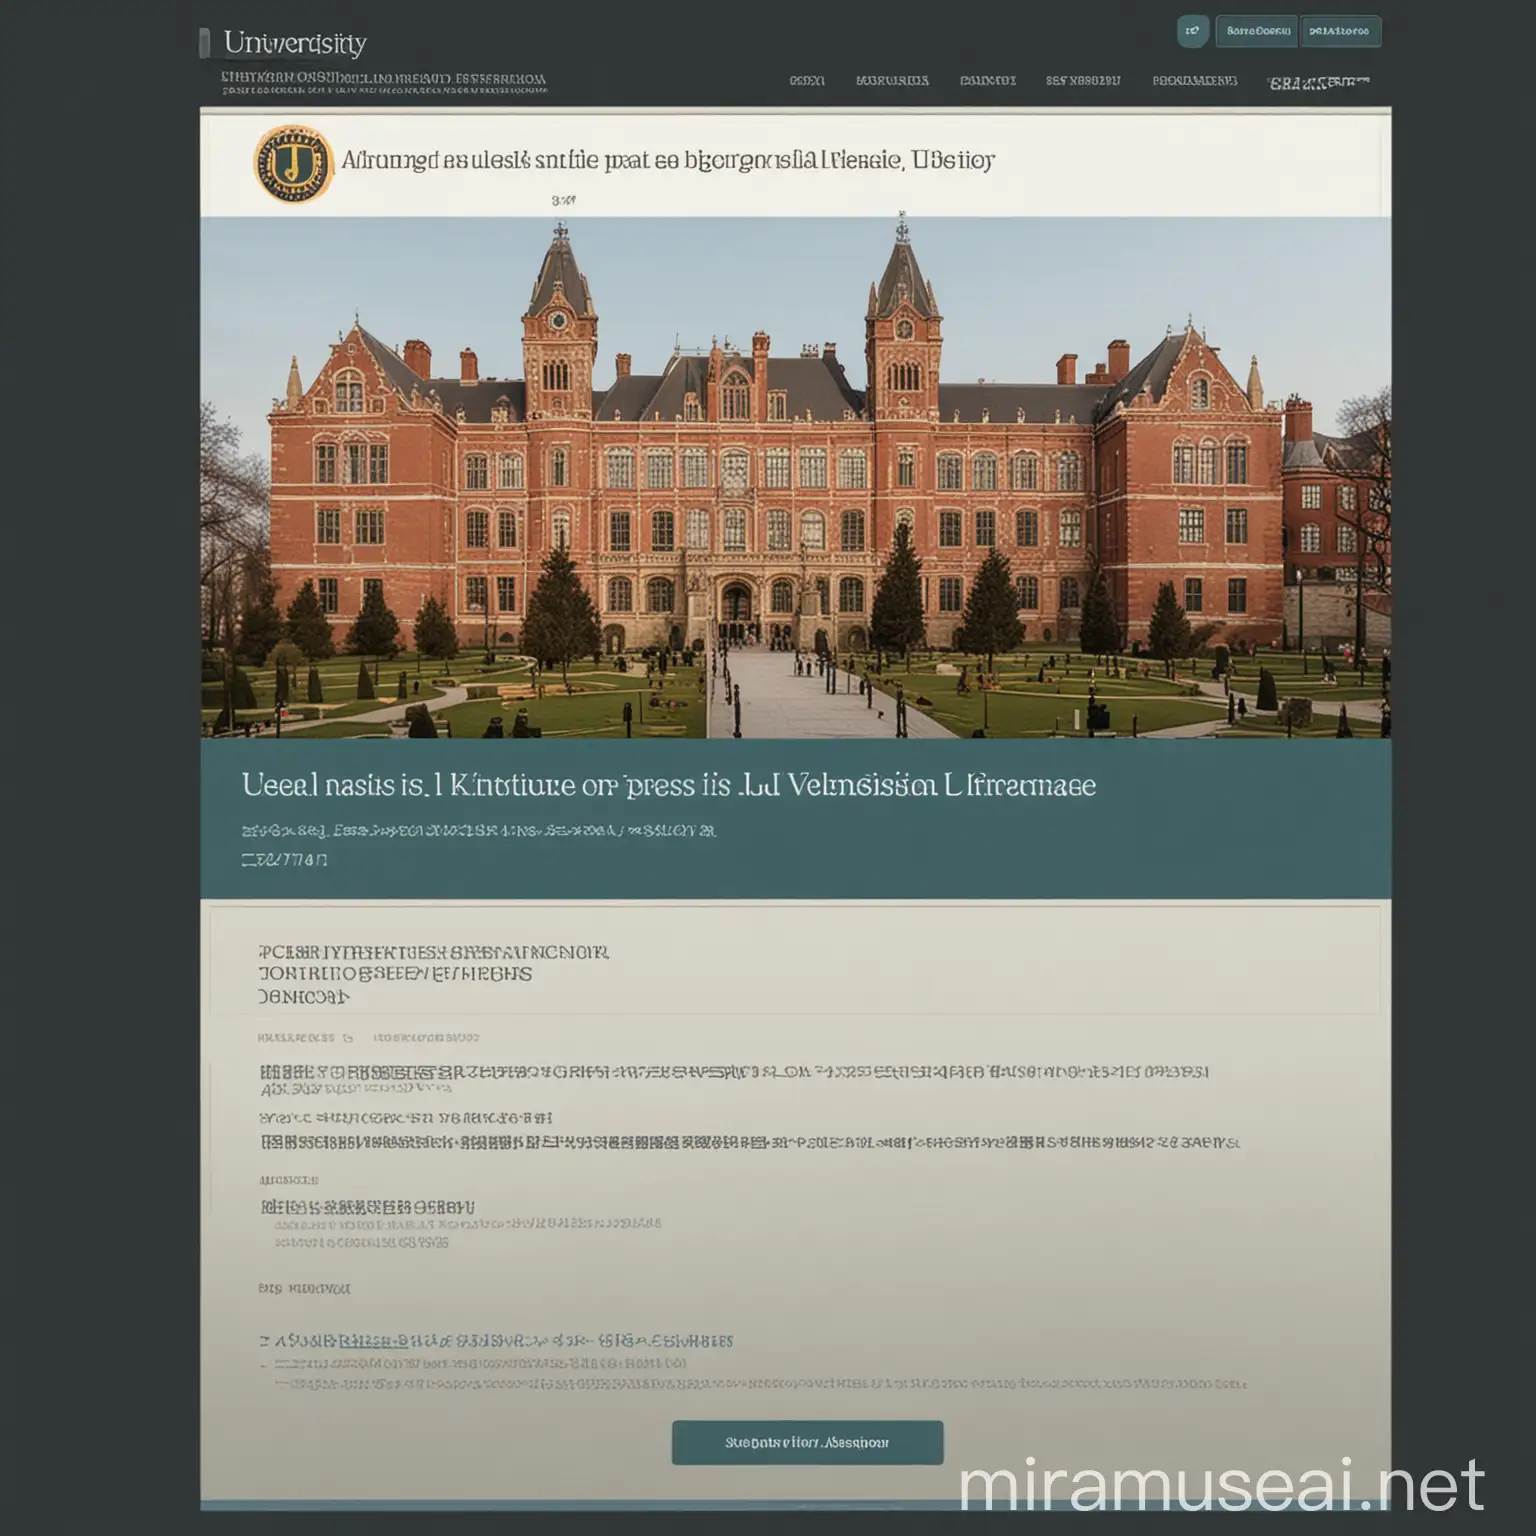 User interface of the University's website